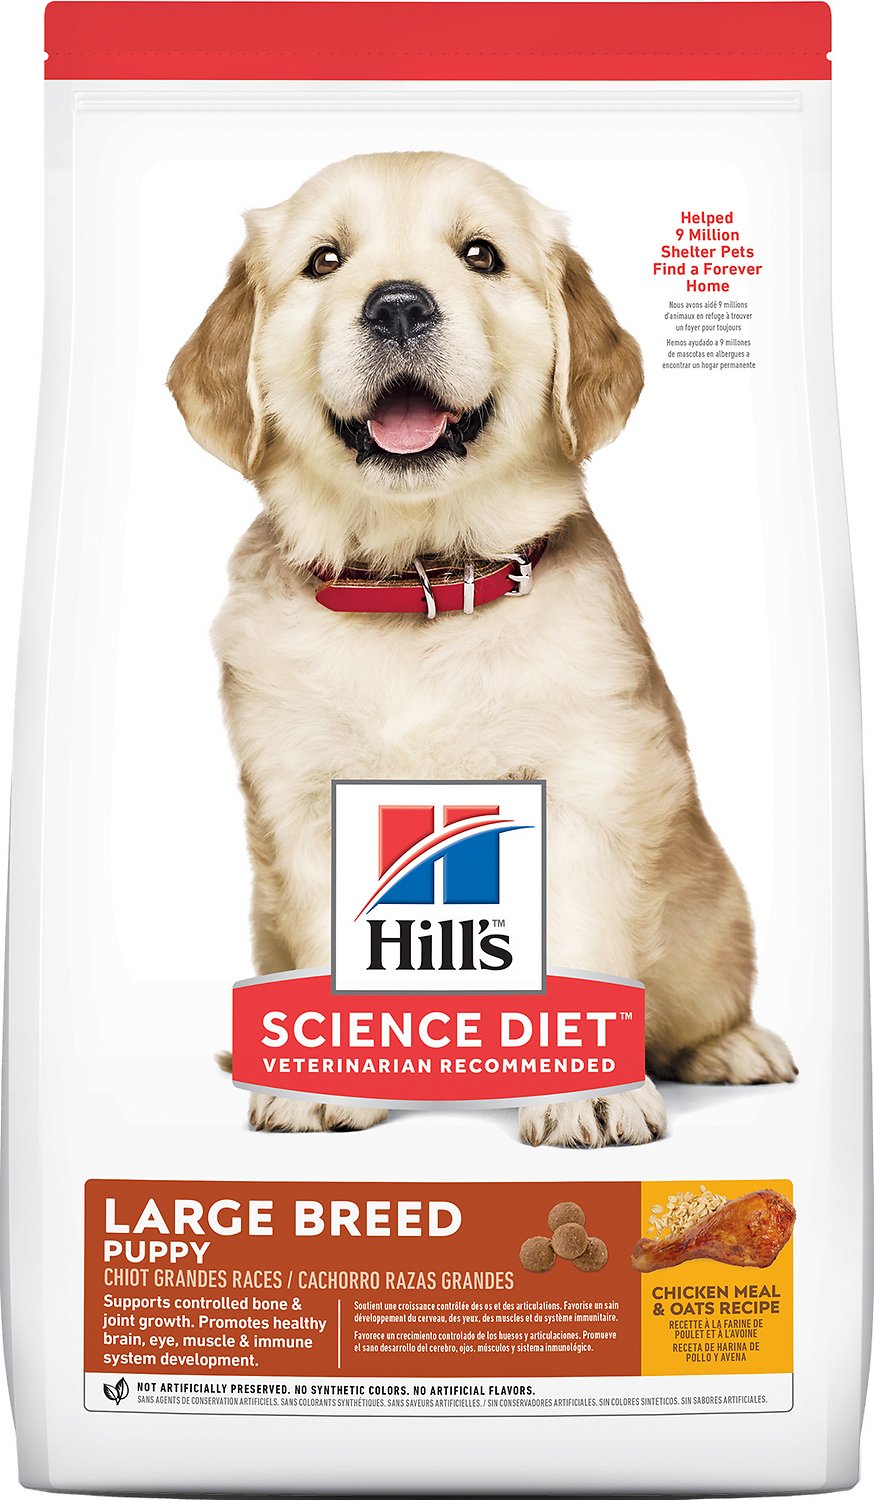 HILL'S SCIENCE DIET PUPPY LARGE BREED X 15.5 LB